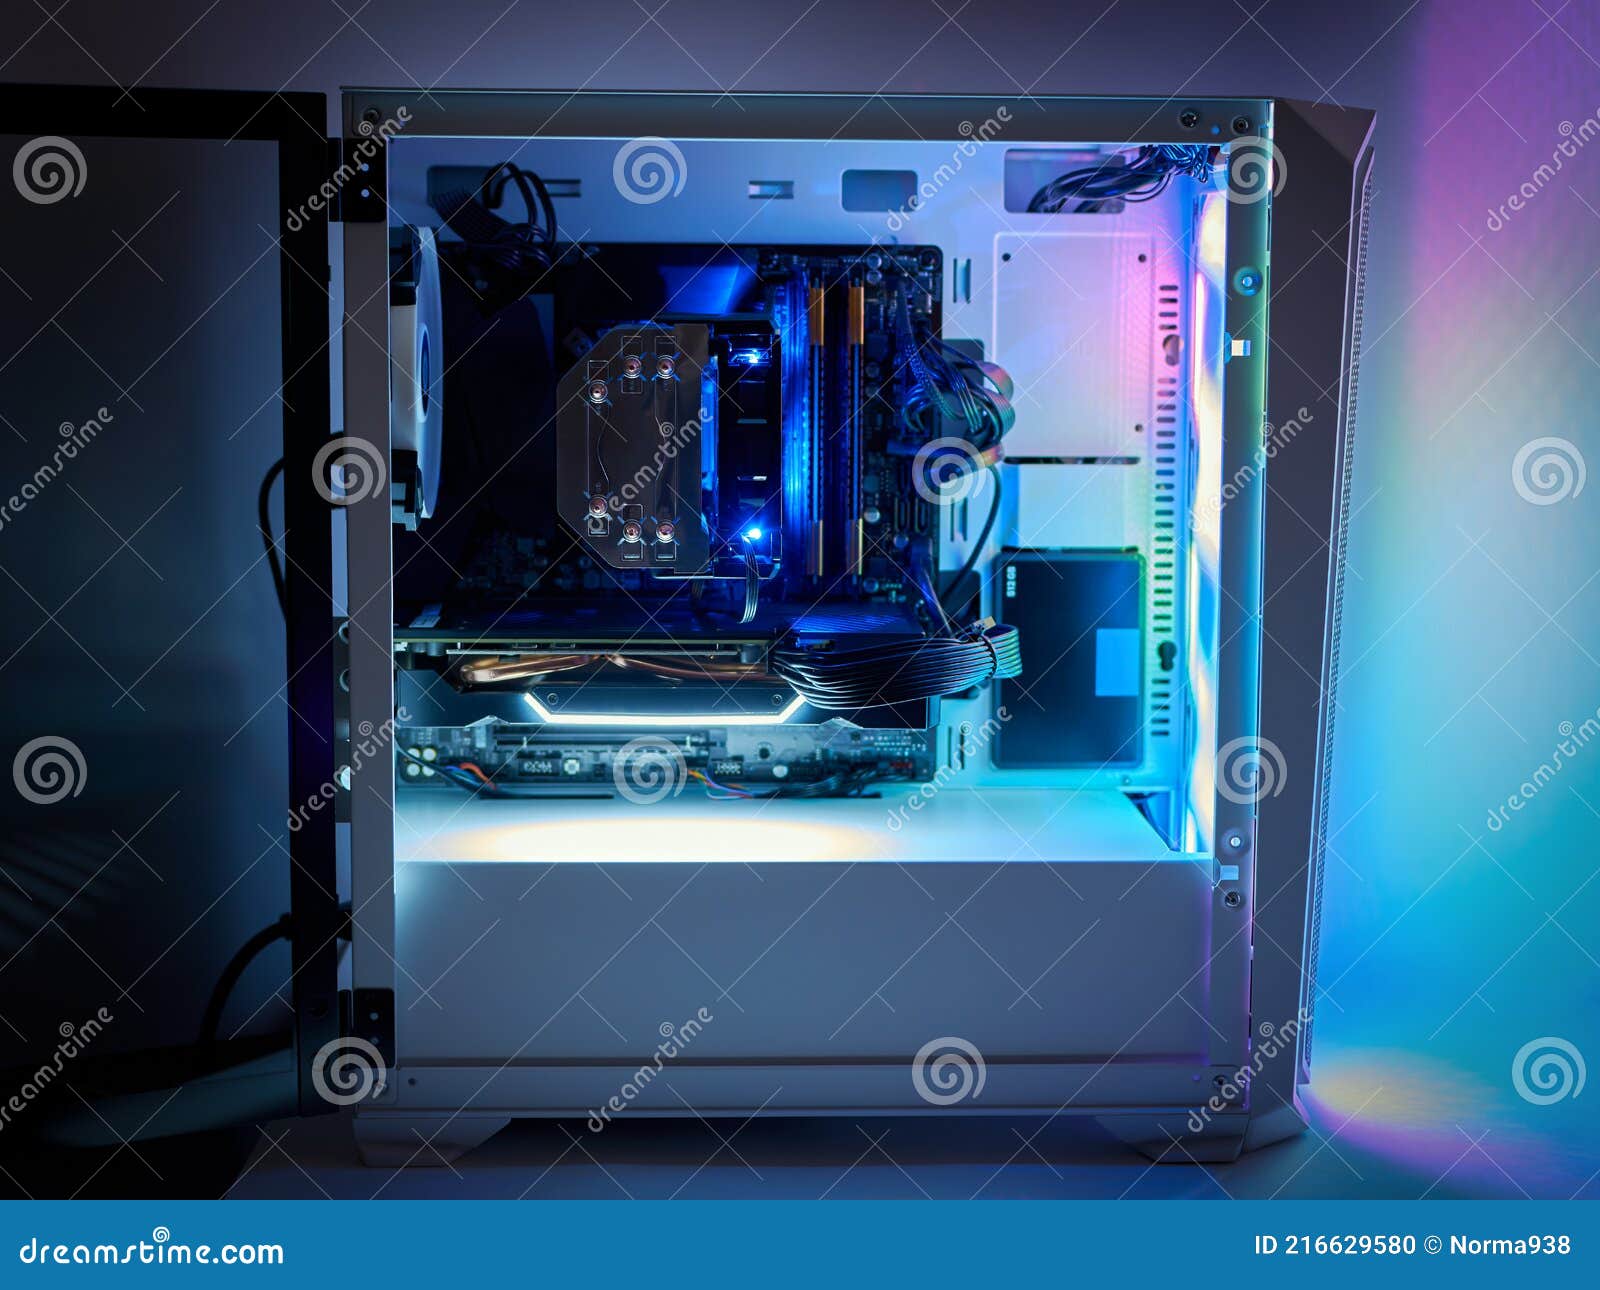 gaming pc and cpu cooling fan with backlight. desktop gaming computer with rgb led light inside. concept of esports